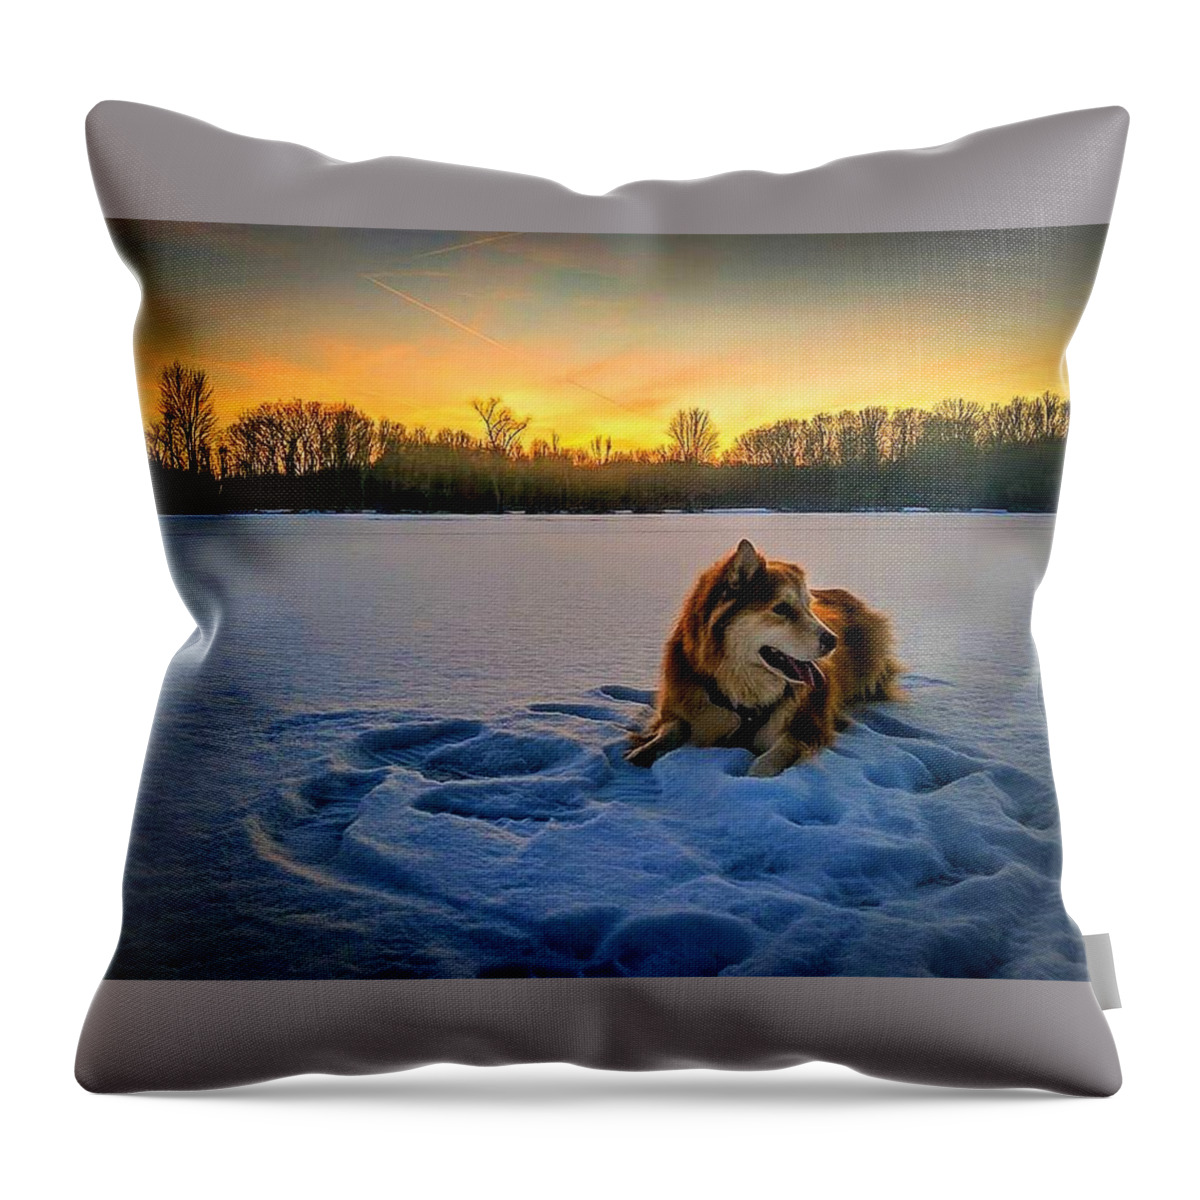  Throw Pillow featuring the photograph Winter Sunset by Brad Nellis